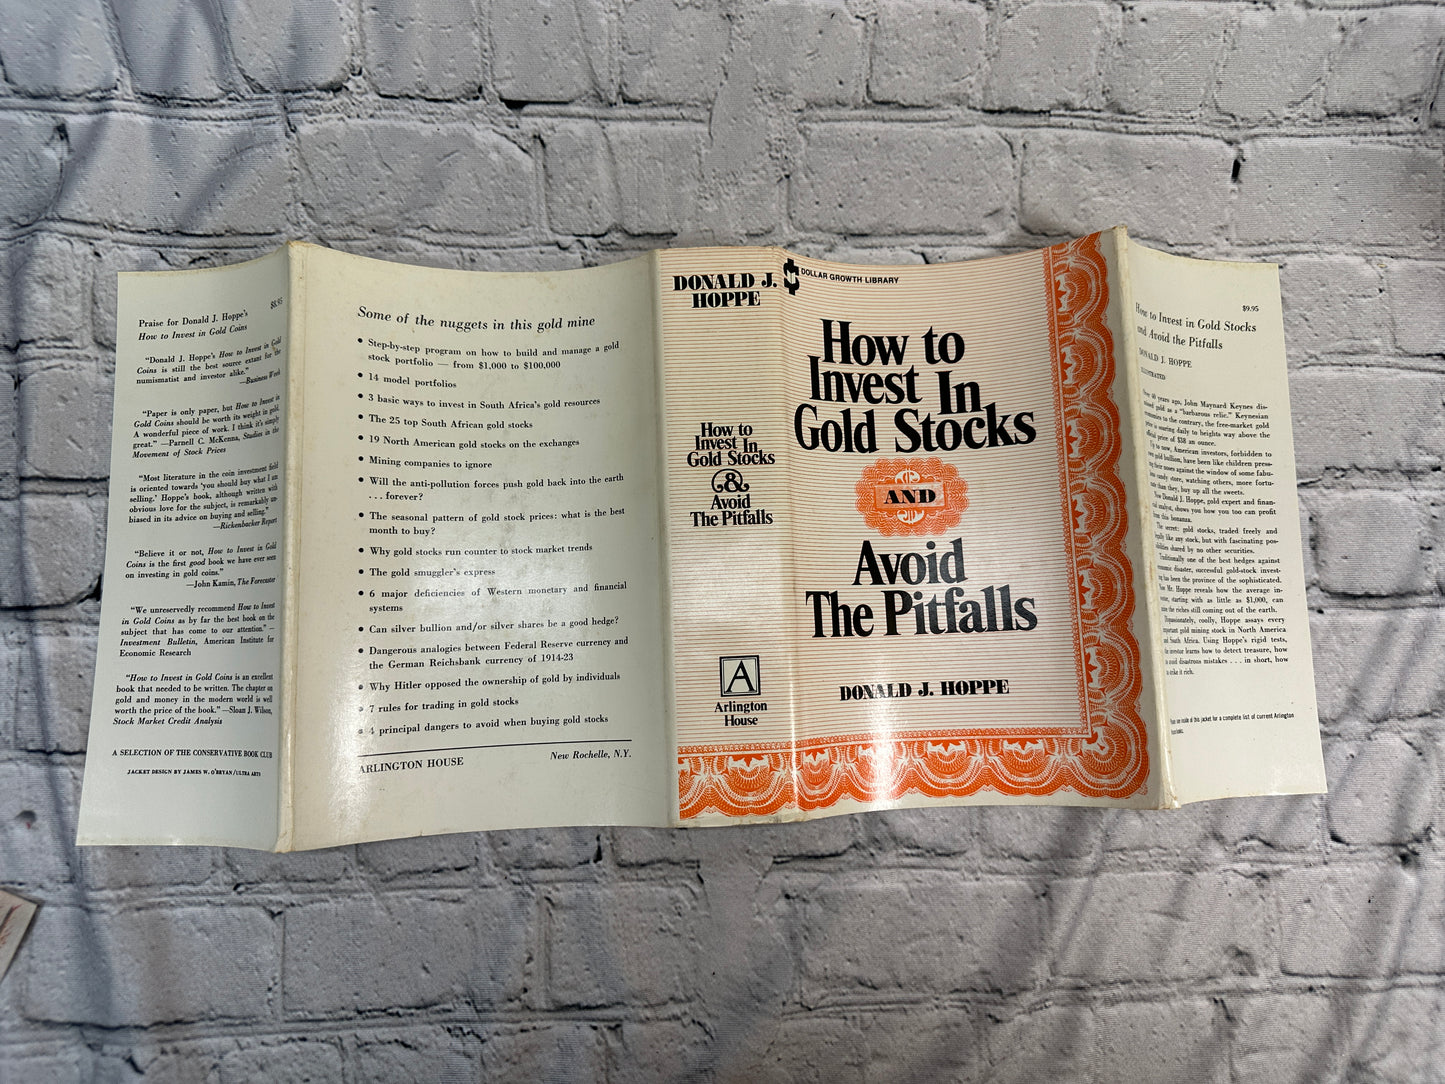 How to Invest in Gold Stocks and Avoid the Pitfalls by Donald Hoppe [1972]